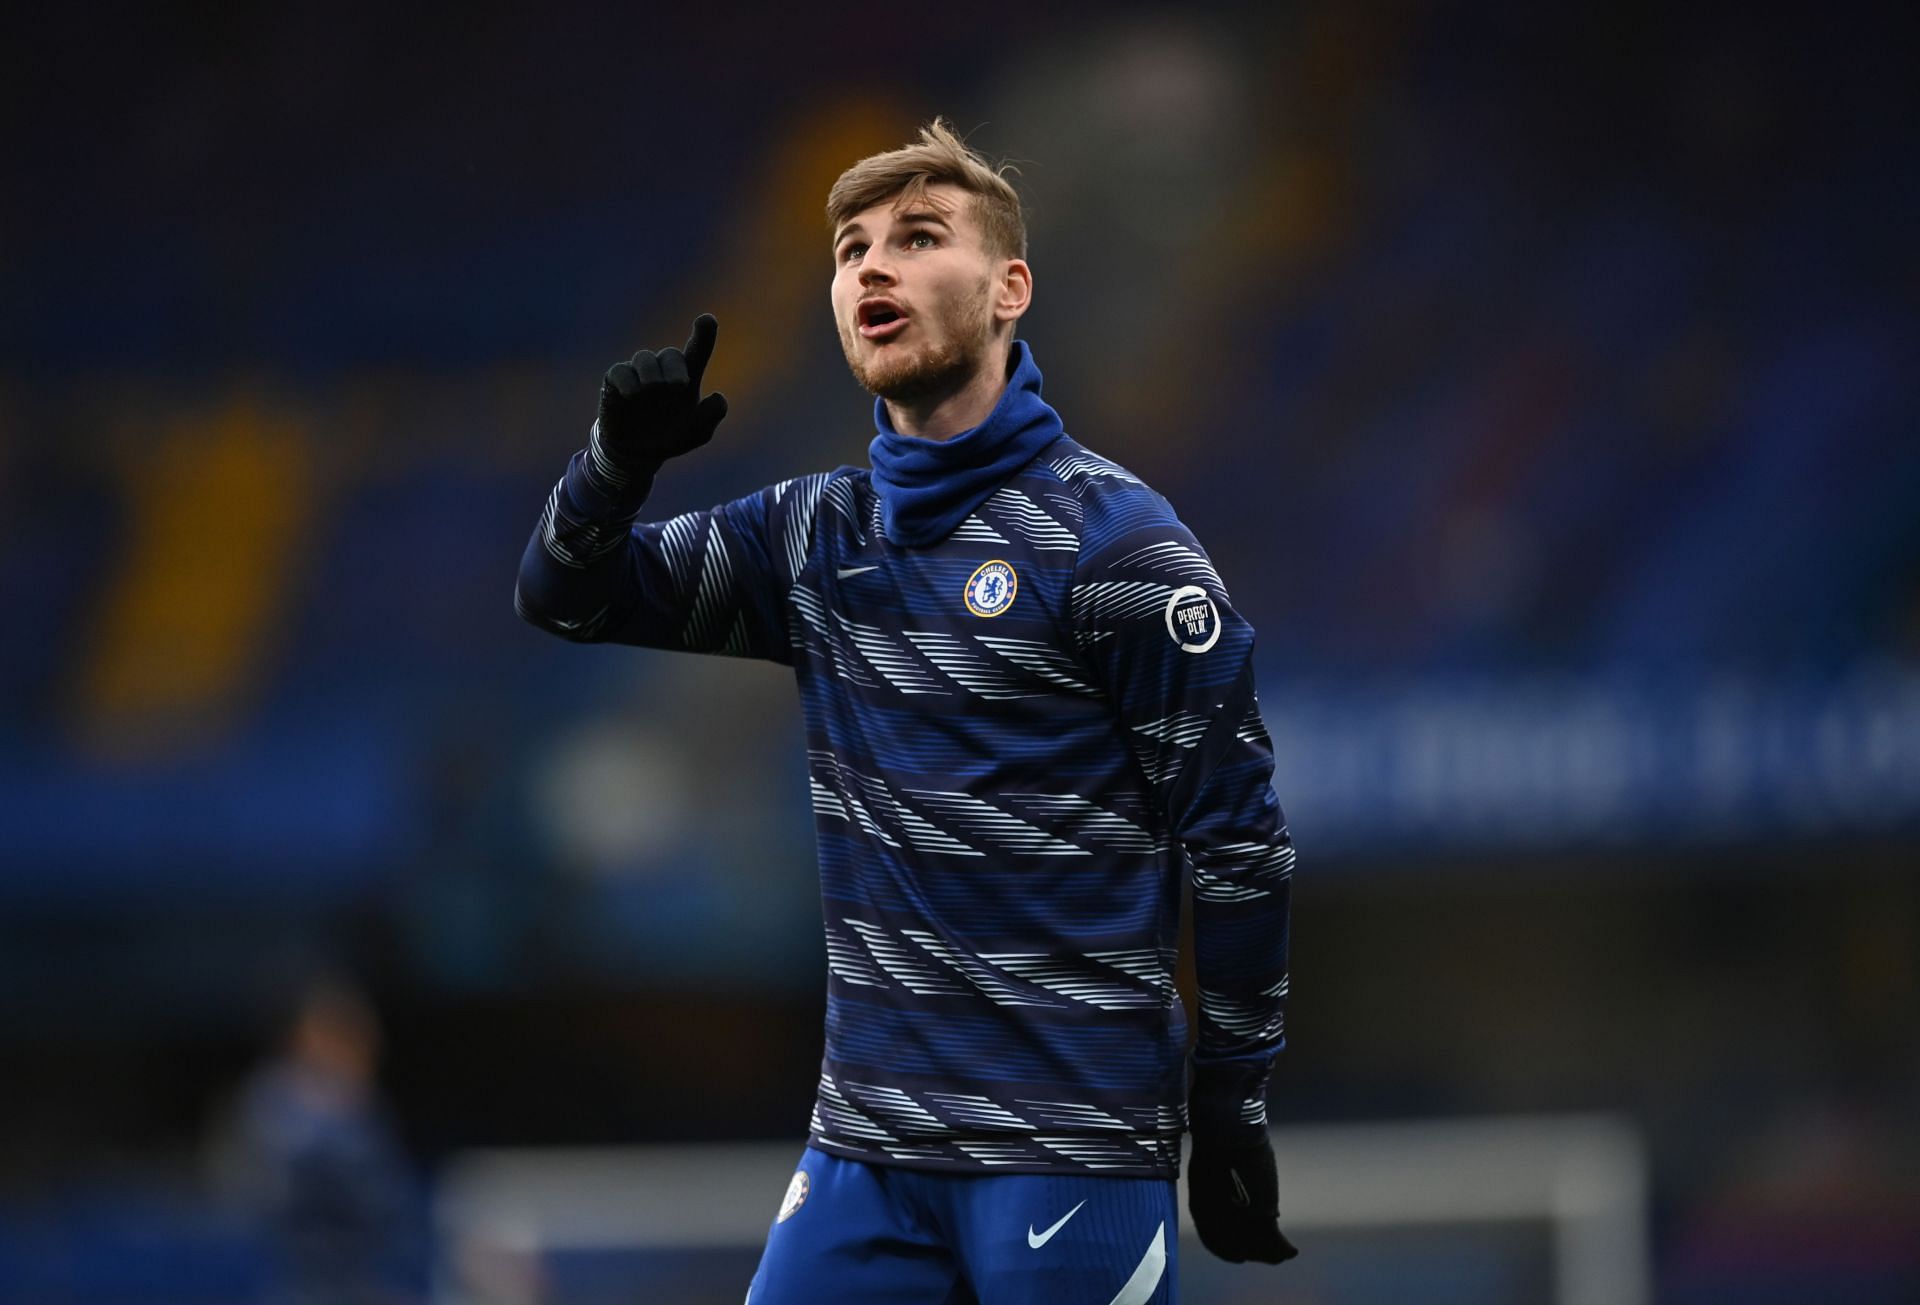 Timo Werner continued his excellent run of form for Chelsea